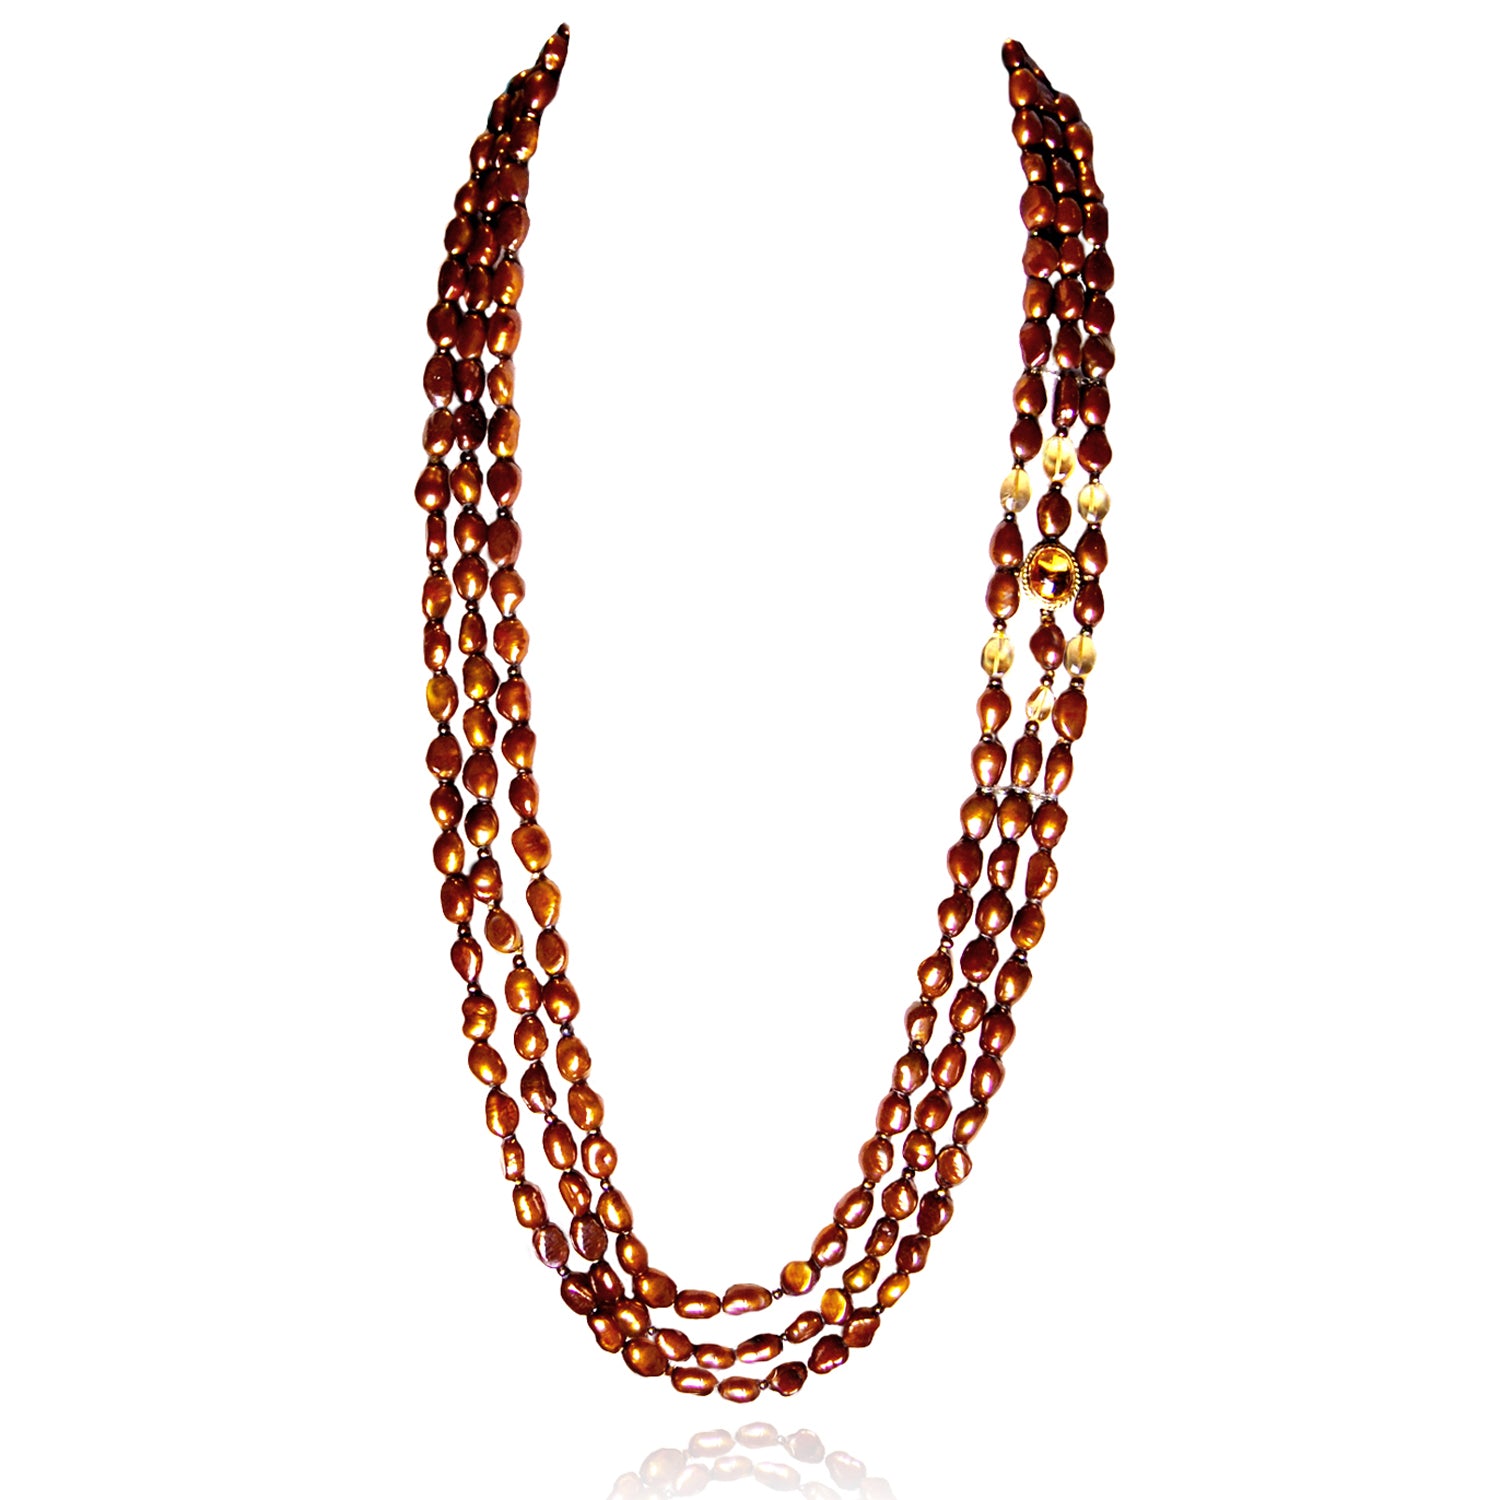 It's a Long Story 3 Strand Necklace With Citrine Statement